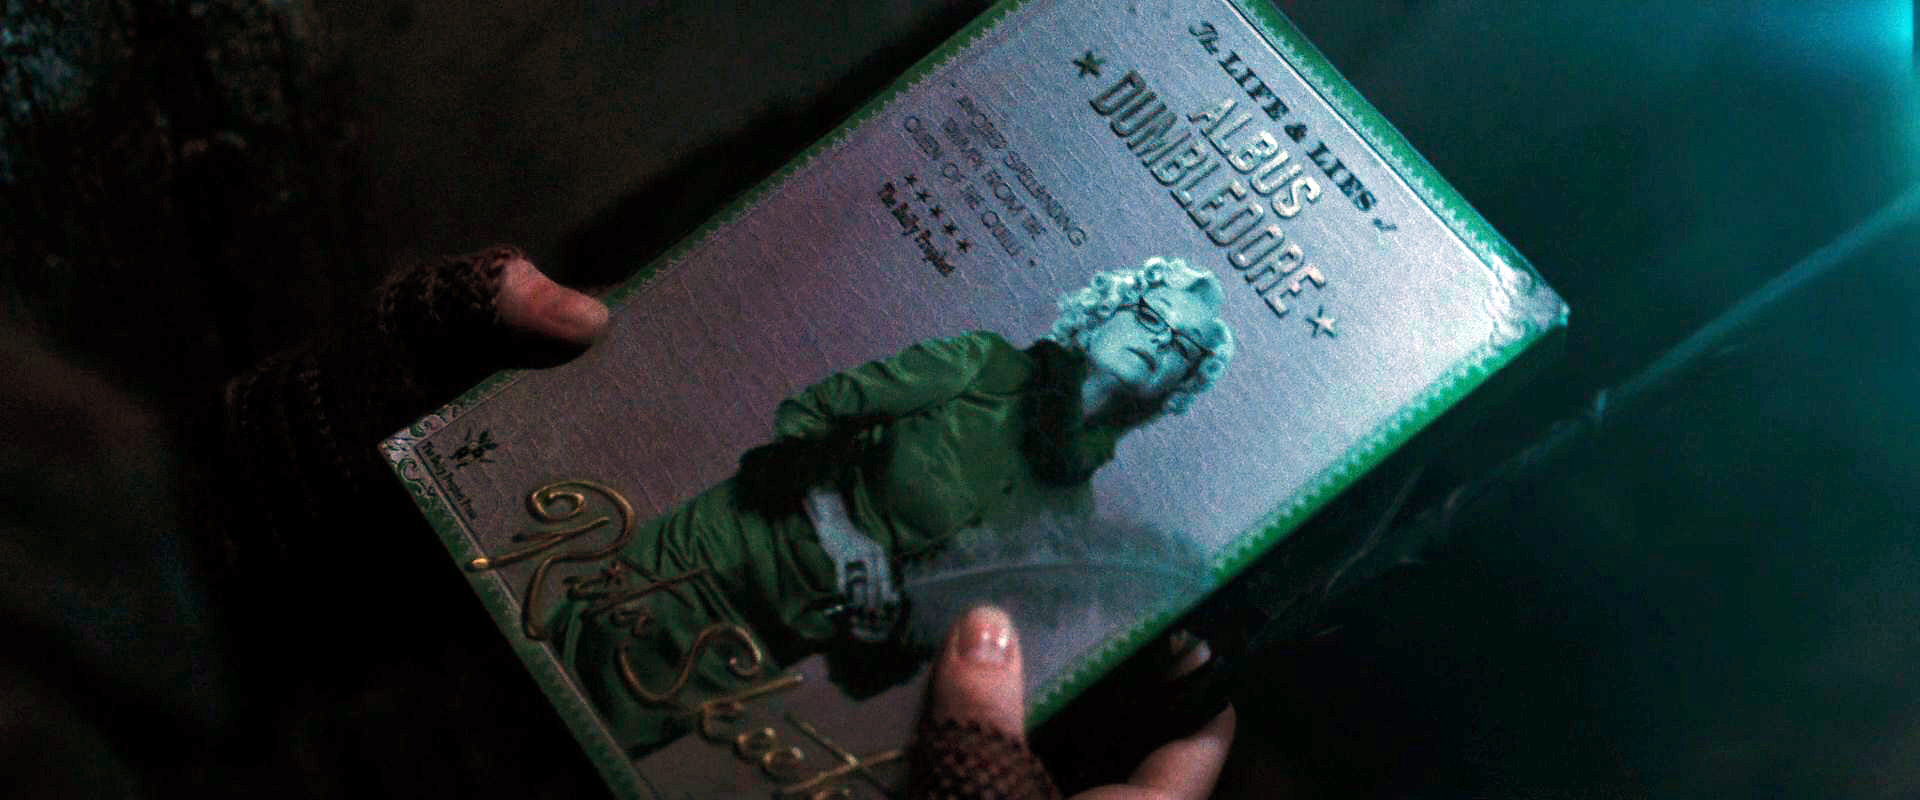 DH1_The_Life_and_Lies_of_Albus_Dumbledore_book_cover.jpg